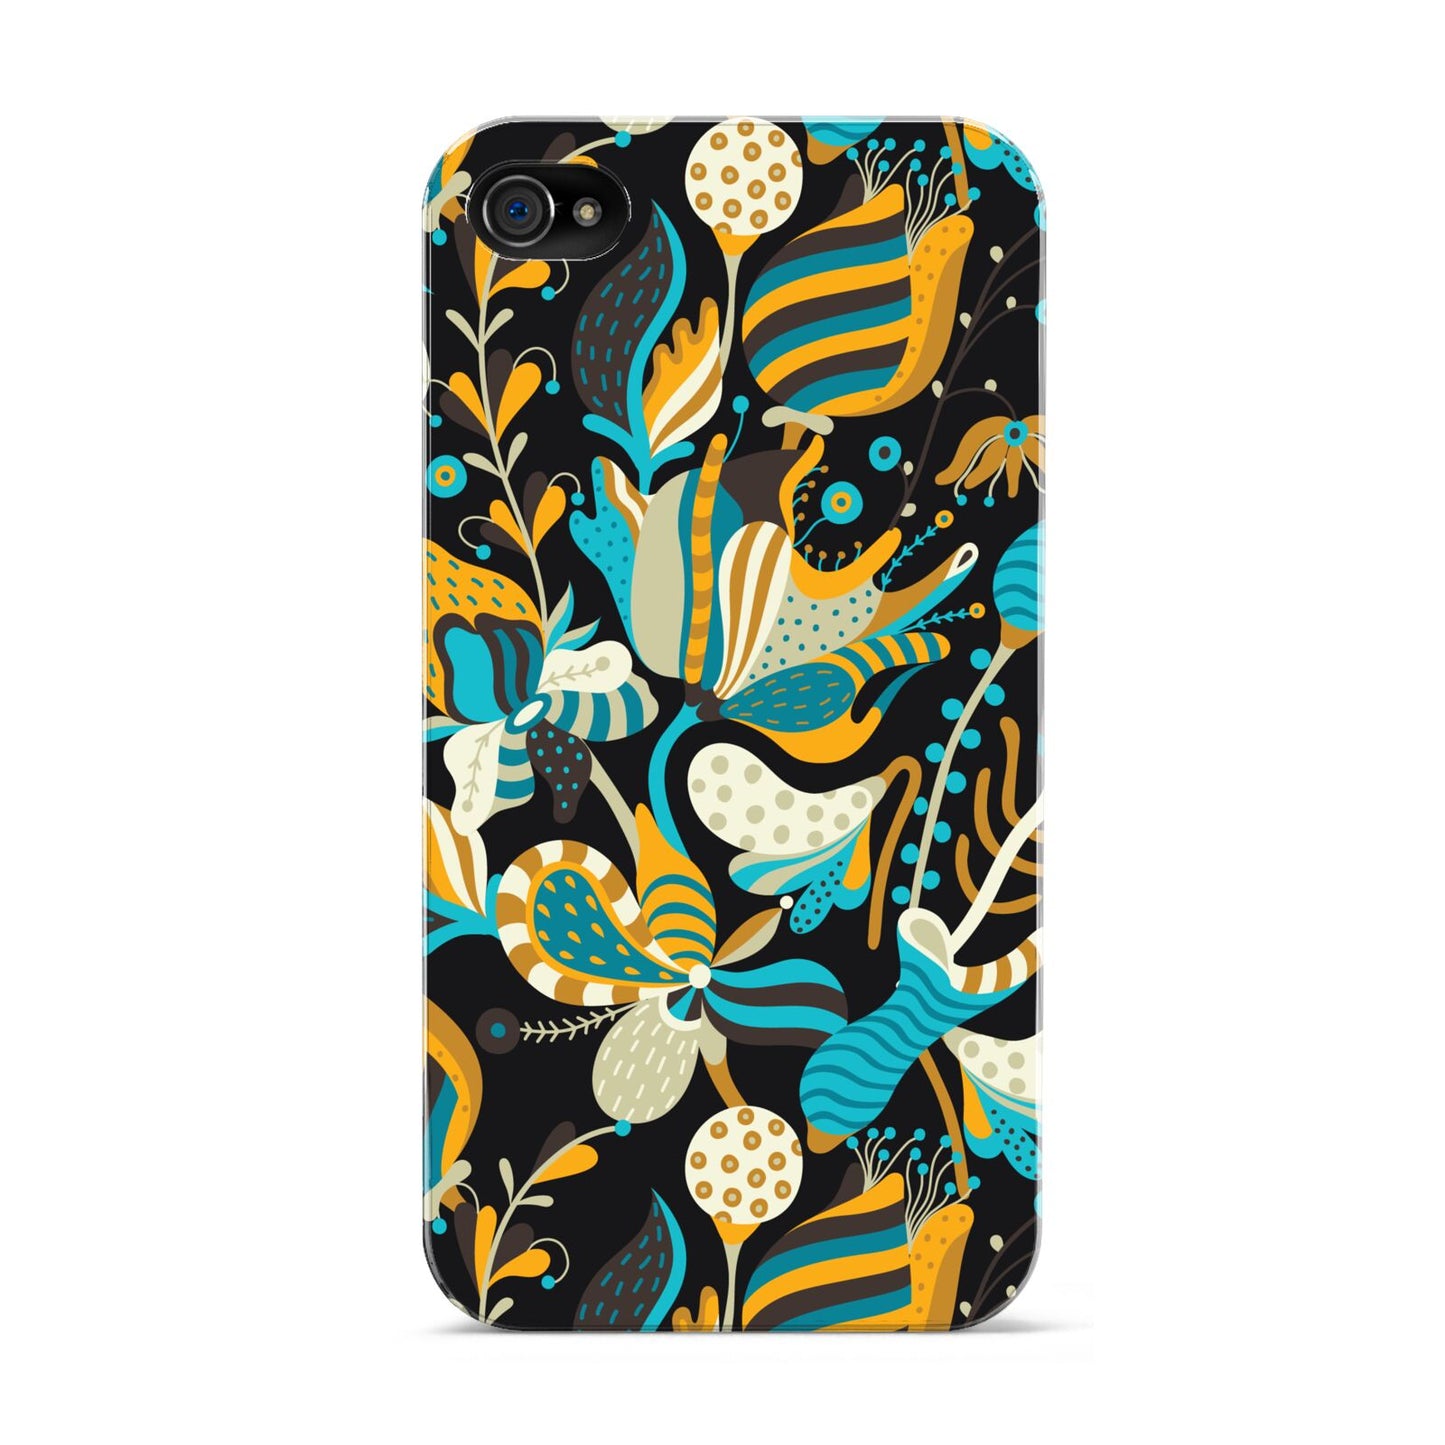 Colourful Floral Apple iPhone 4s Case